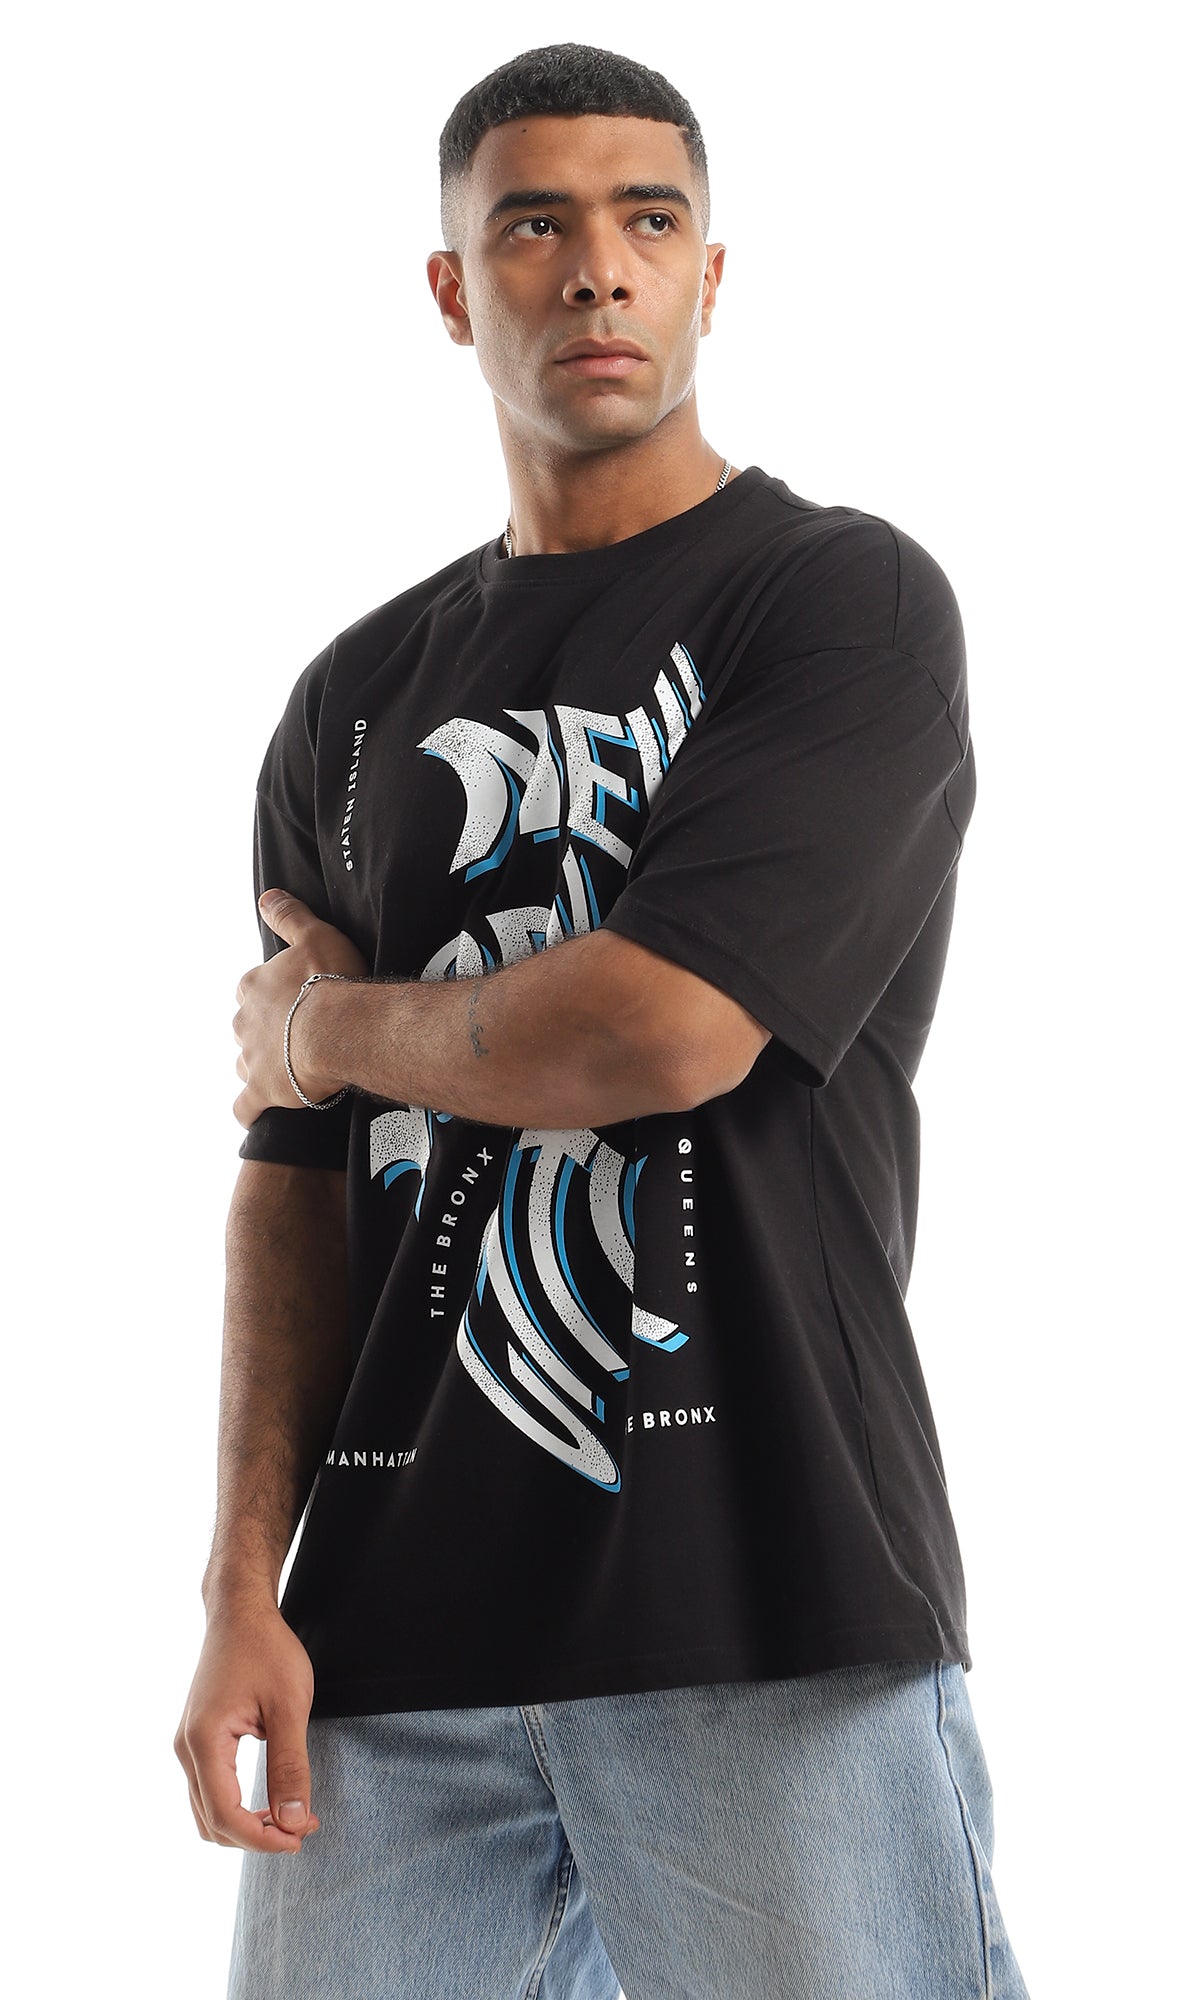 O161282 "New York City" Front Printed T-Shirt With Short Sleeves - Black